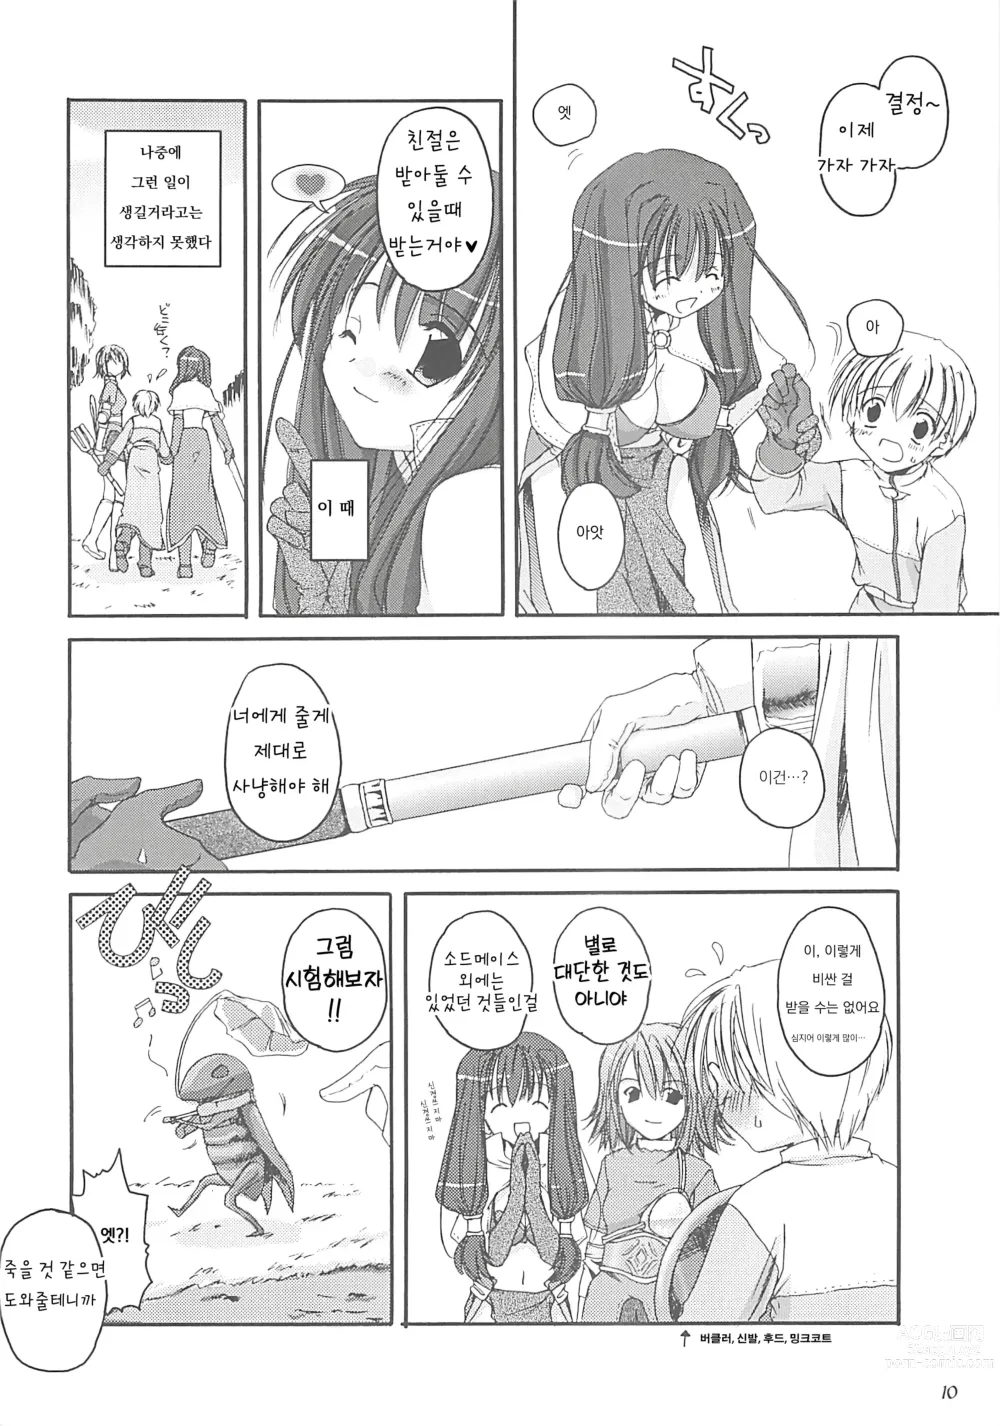 Page 9 of doujinshi D.L. Action 13